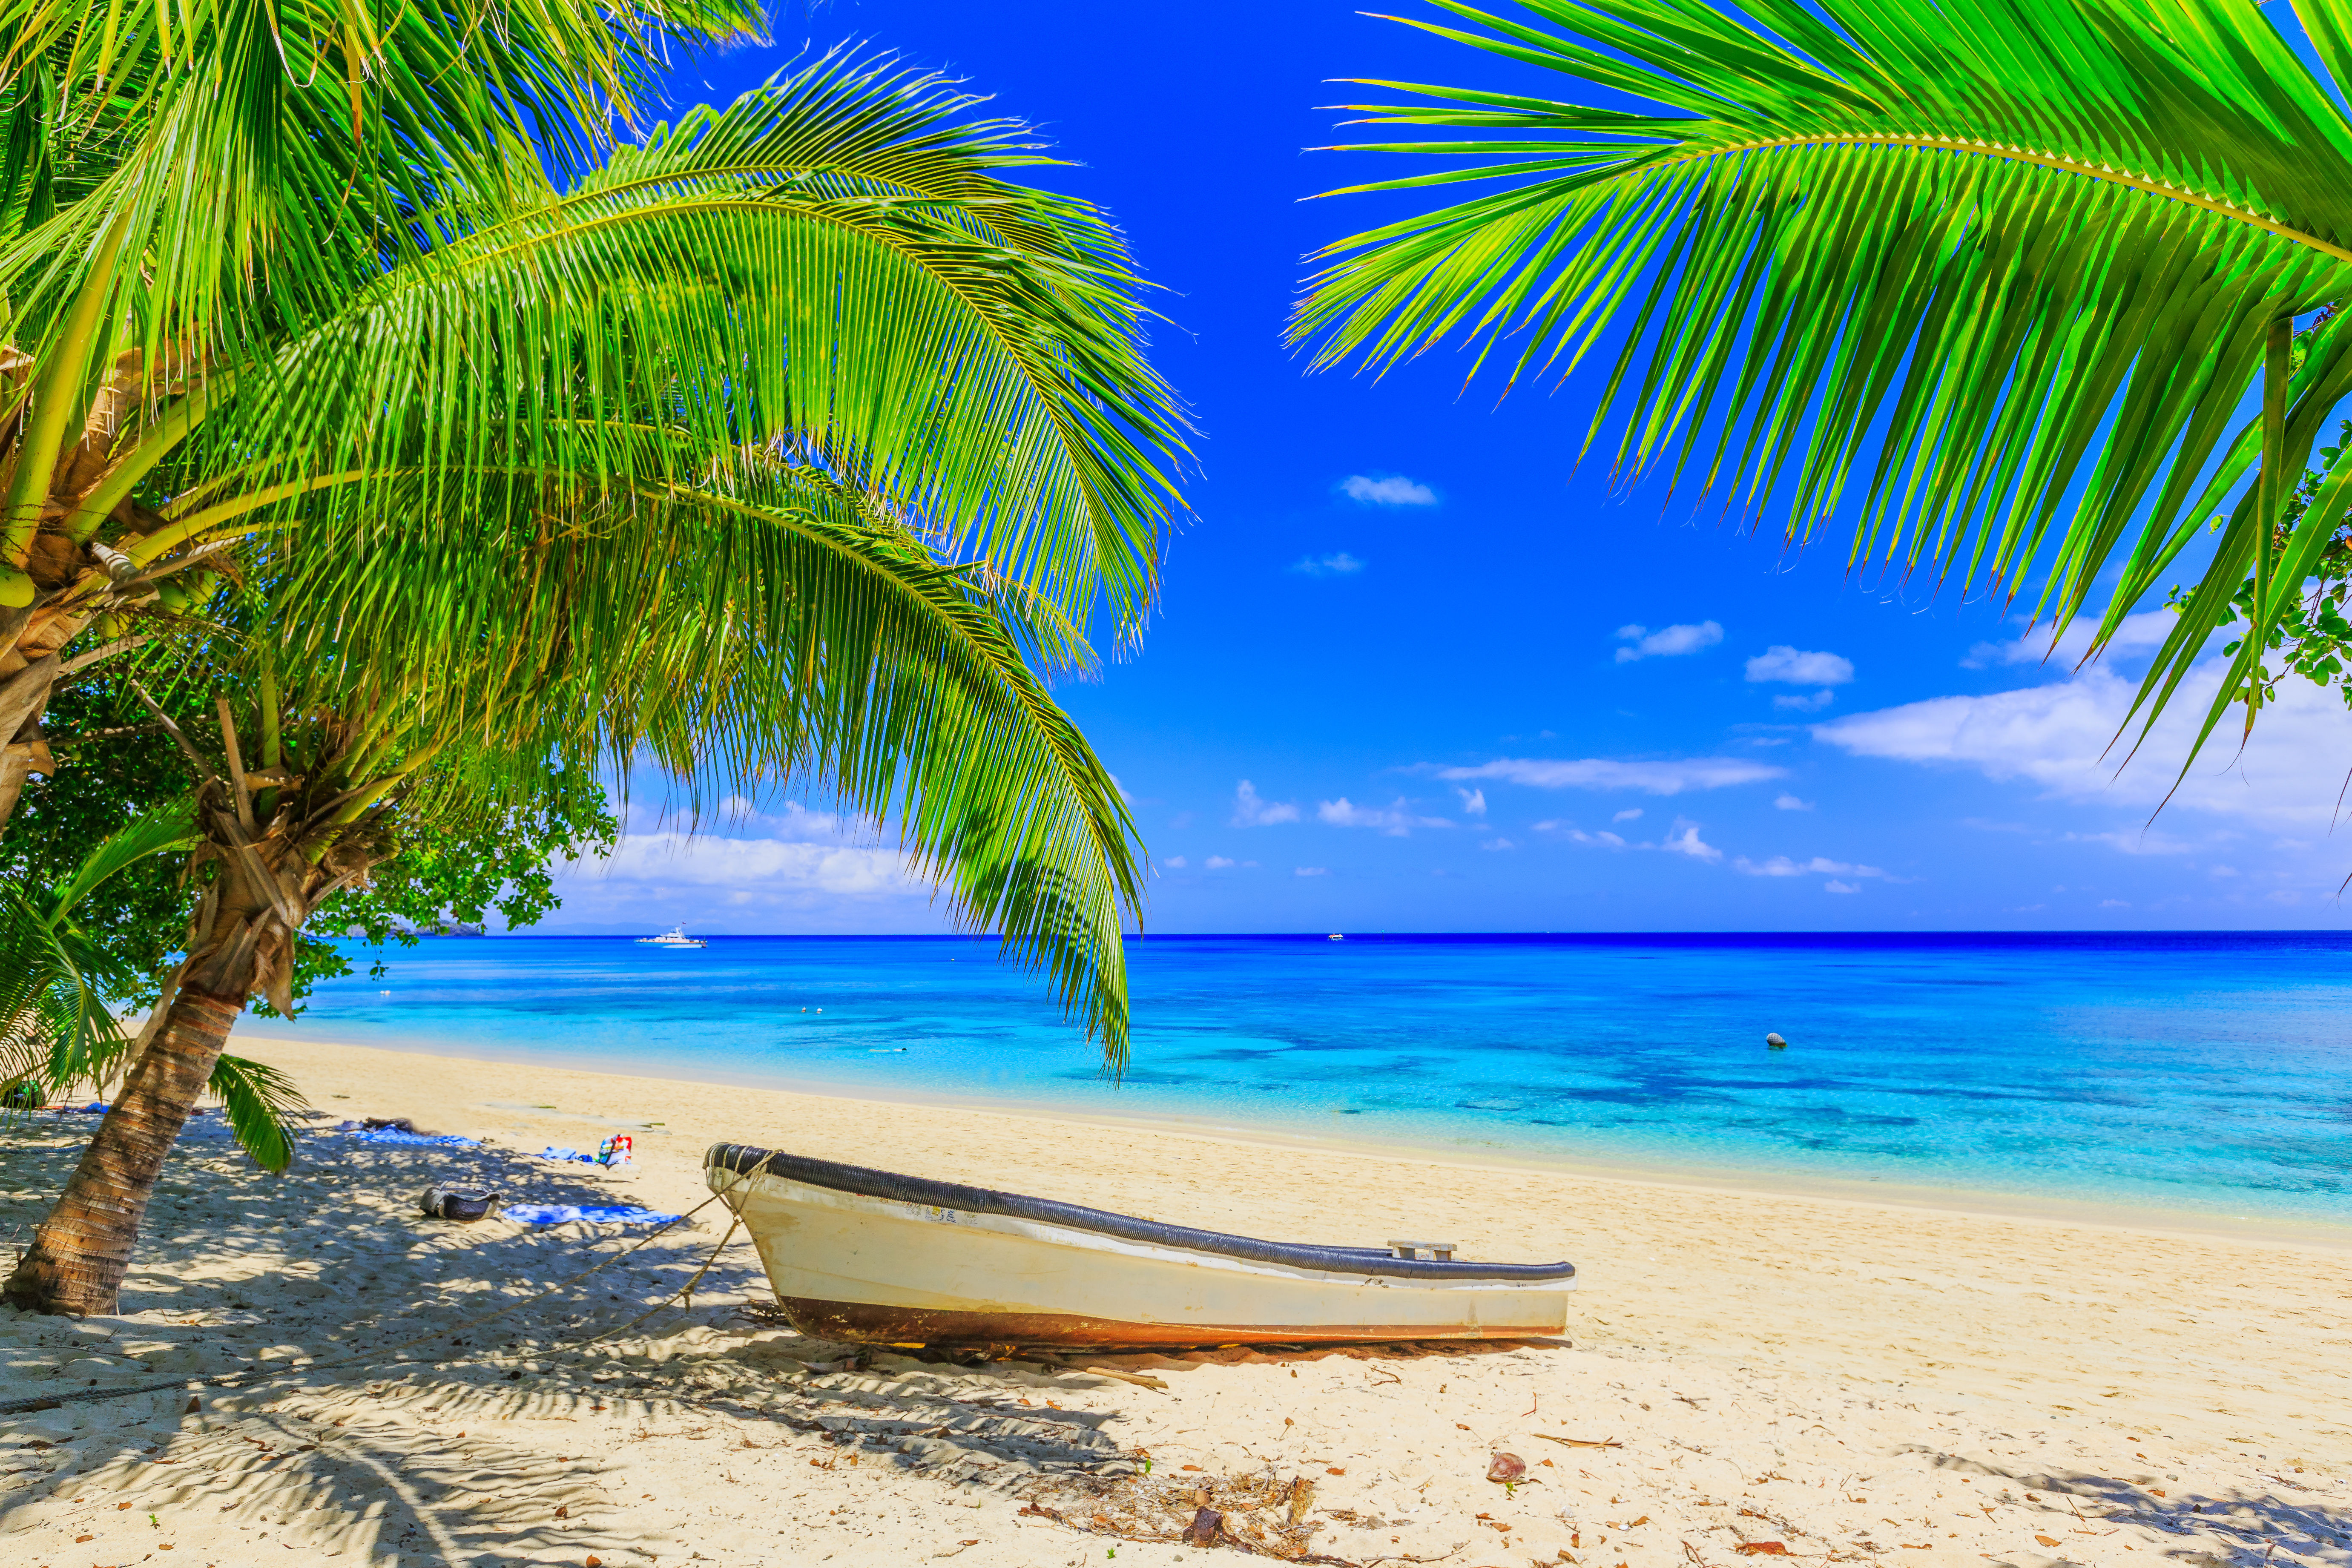 Small white wooden boat on white sand beach with palm trees and turquoise waters in Fiji.